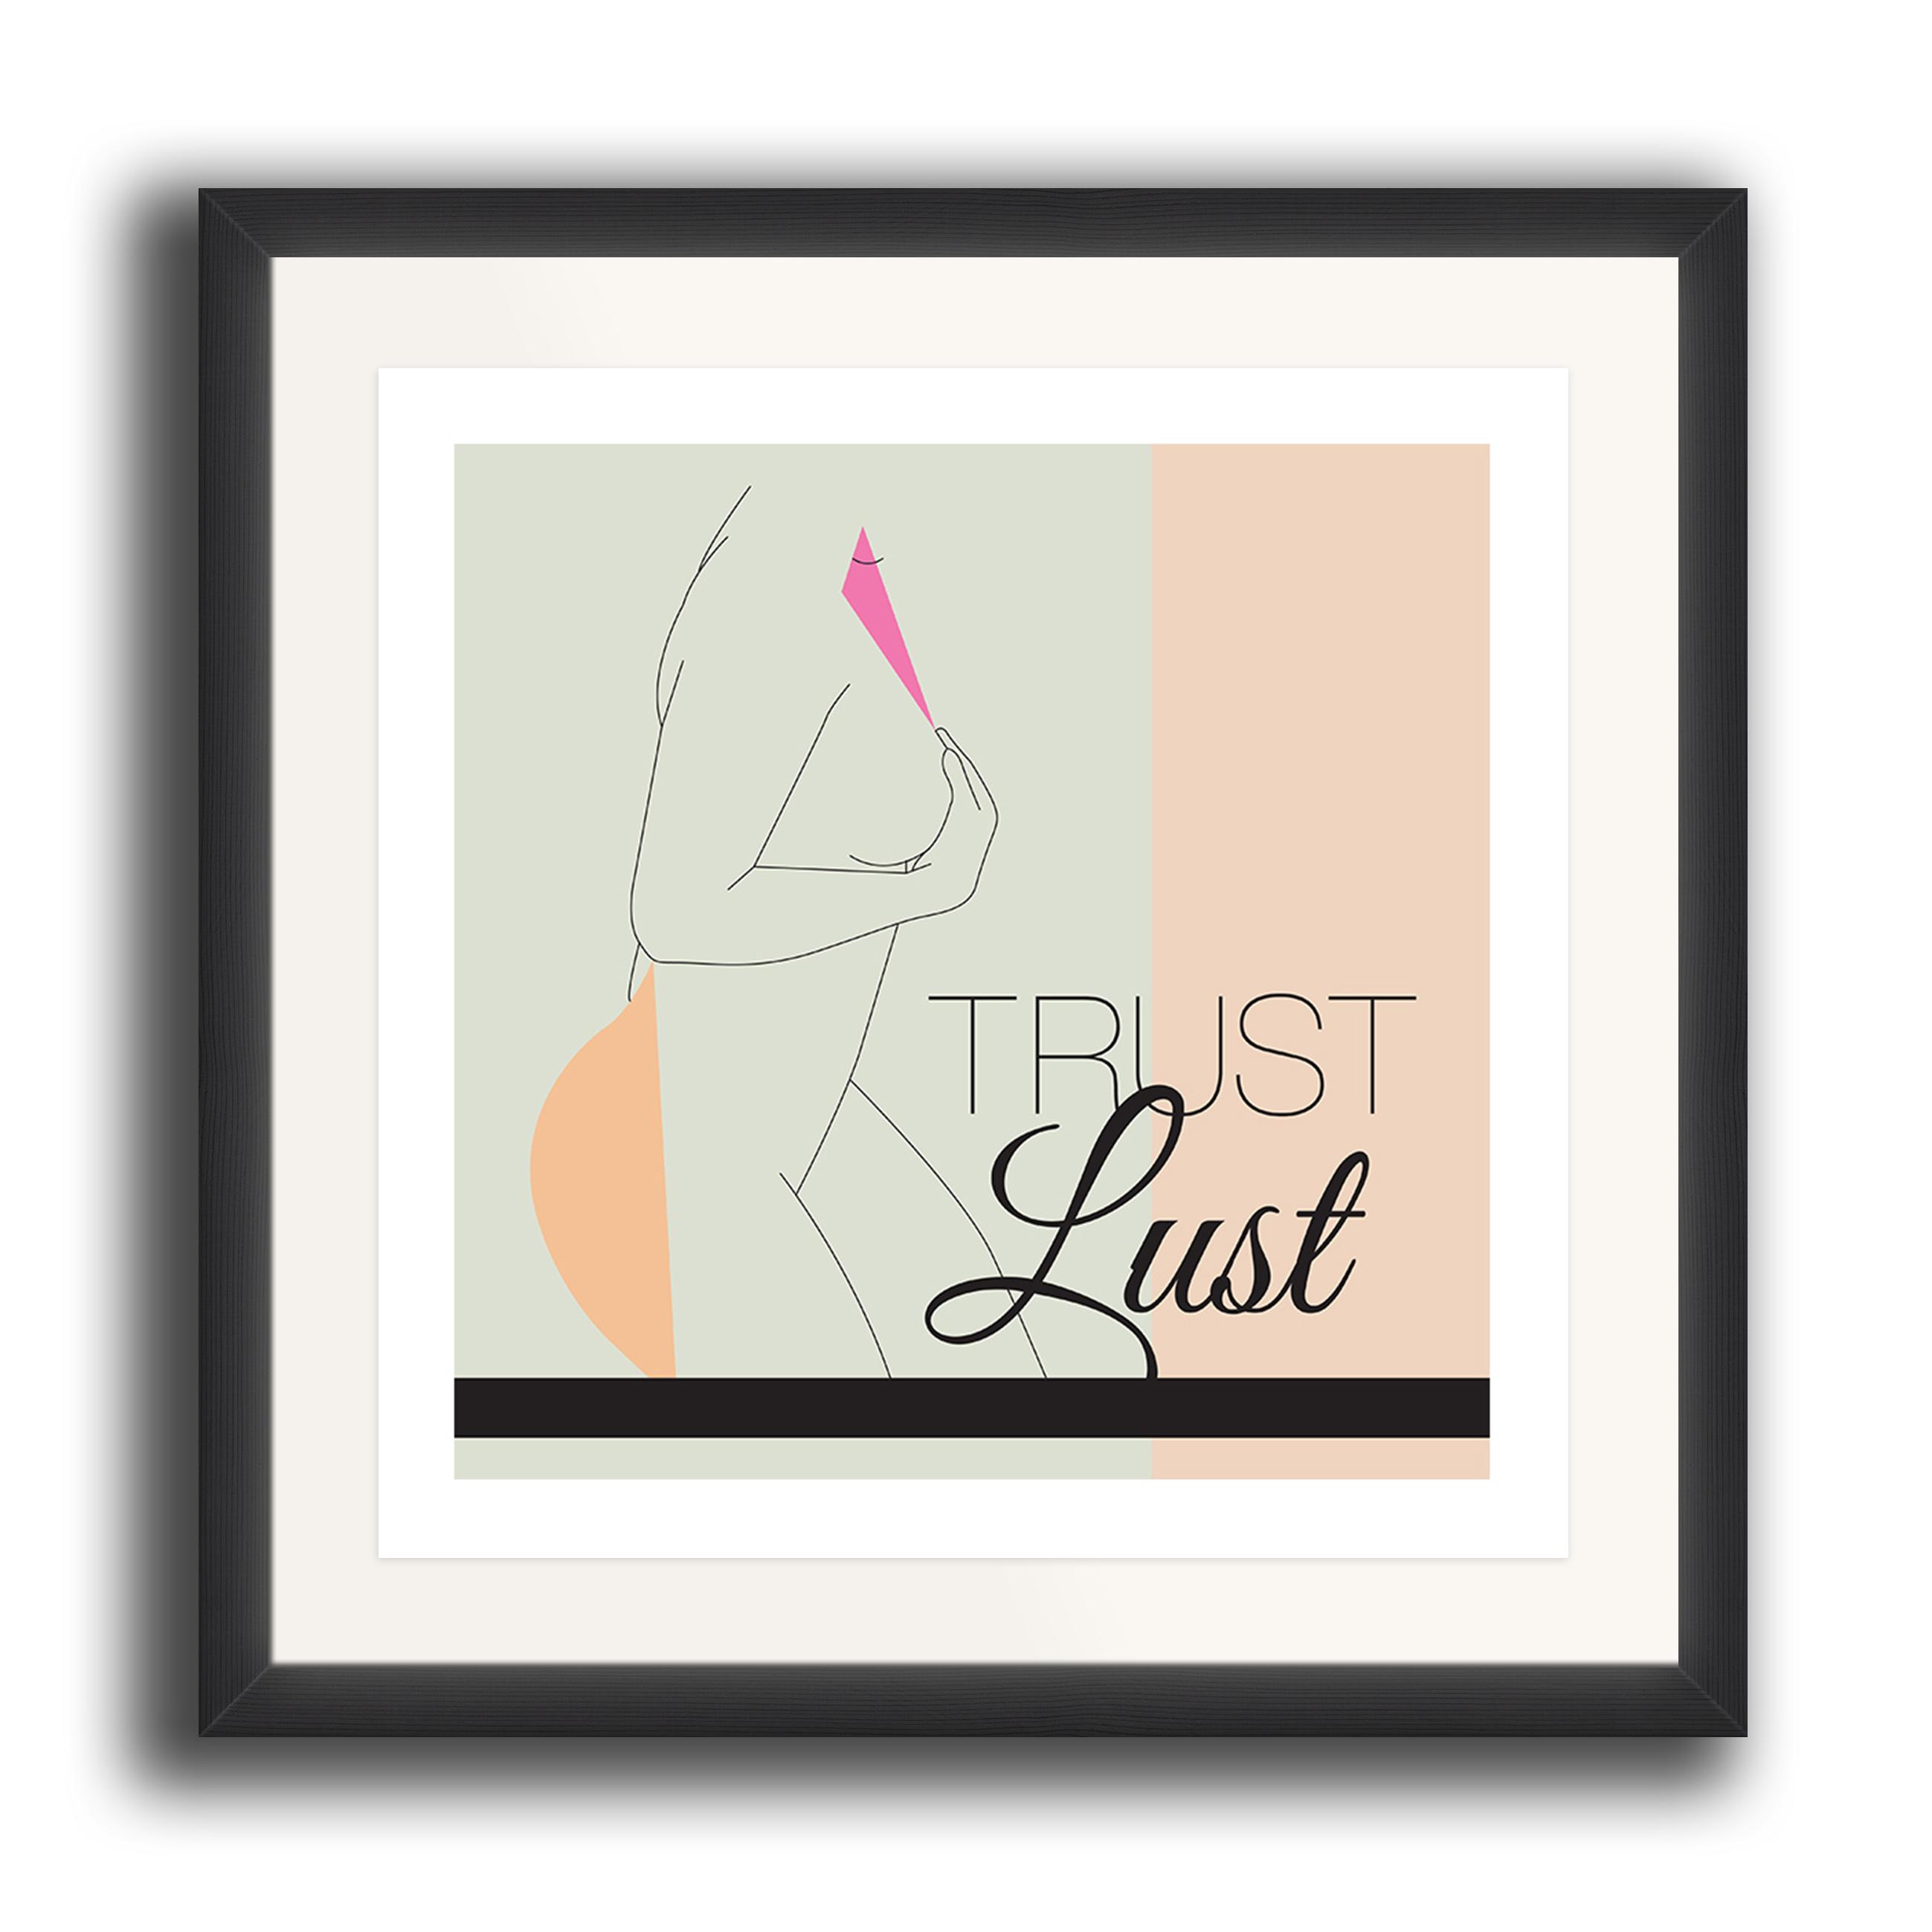 A digital typography inspired print by Clarrie-Anne on eco fine art paper titled Trust Lust showing a line drawing of a naked female with with colour, shapes and typography. The image is set in a black coloured picture frame.